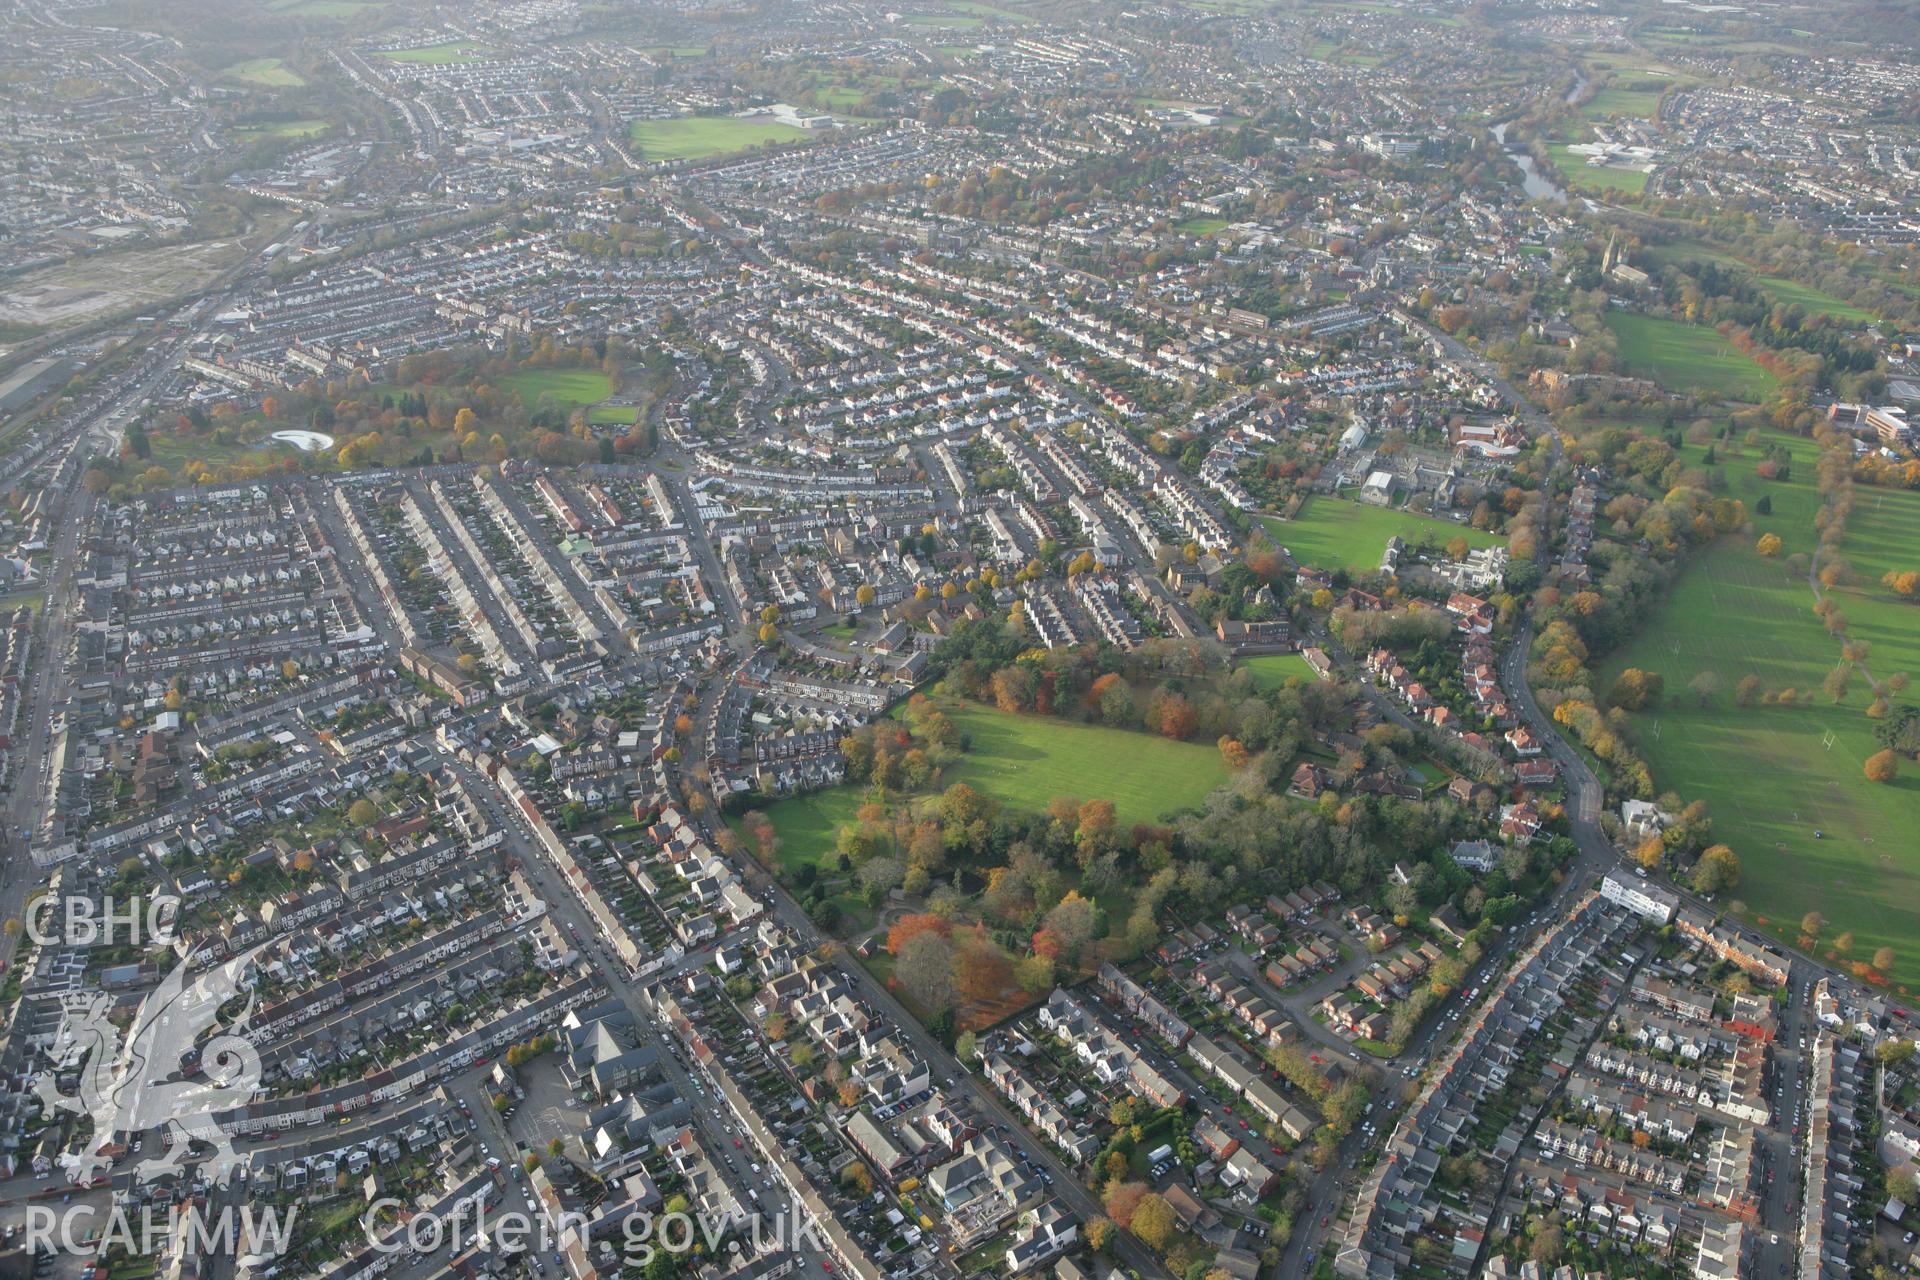 RCAHMW colour oblique photograph of Thompson Park (Sir David's Fields) and housing at Canton and Llandaff, Cardiff. Taken by Toby Driver on 12/11/2008.